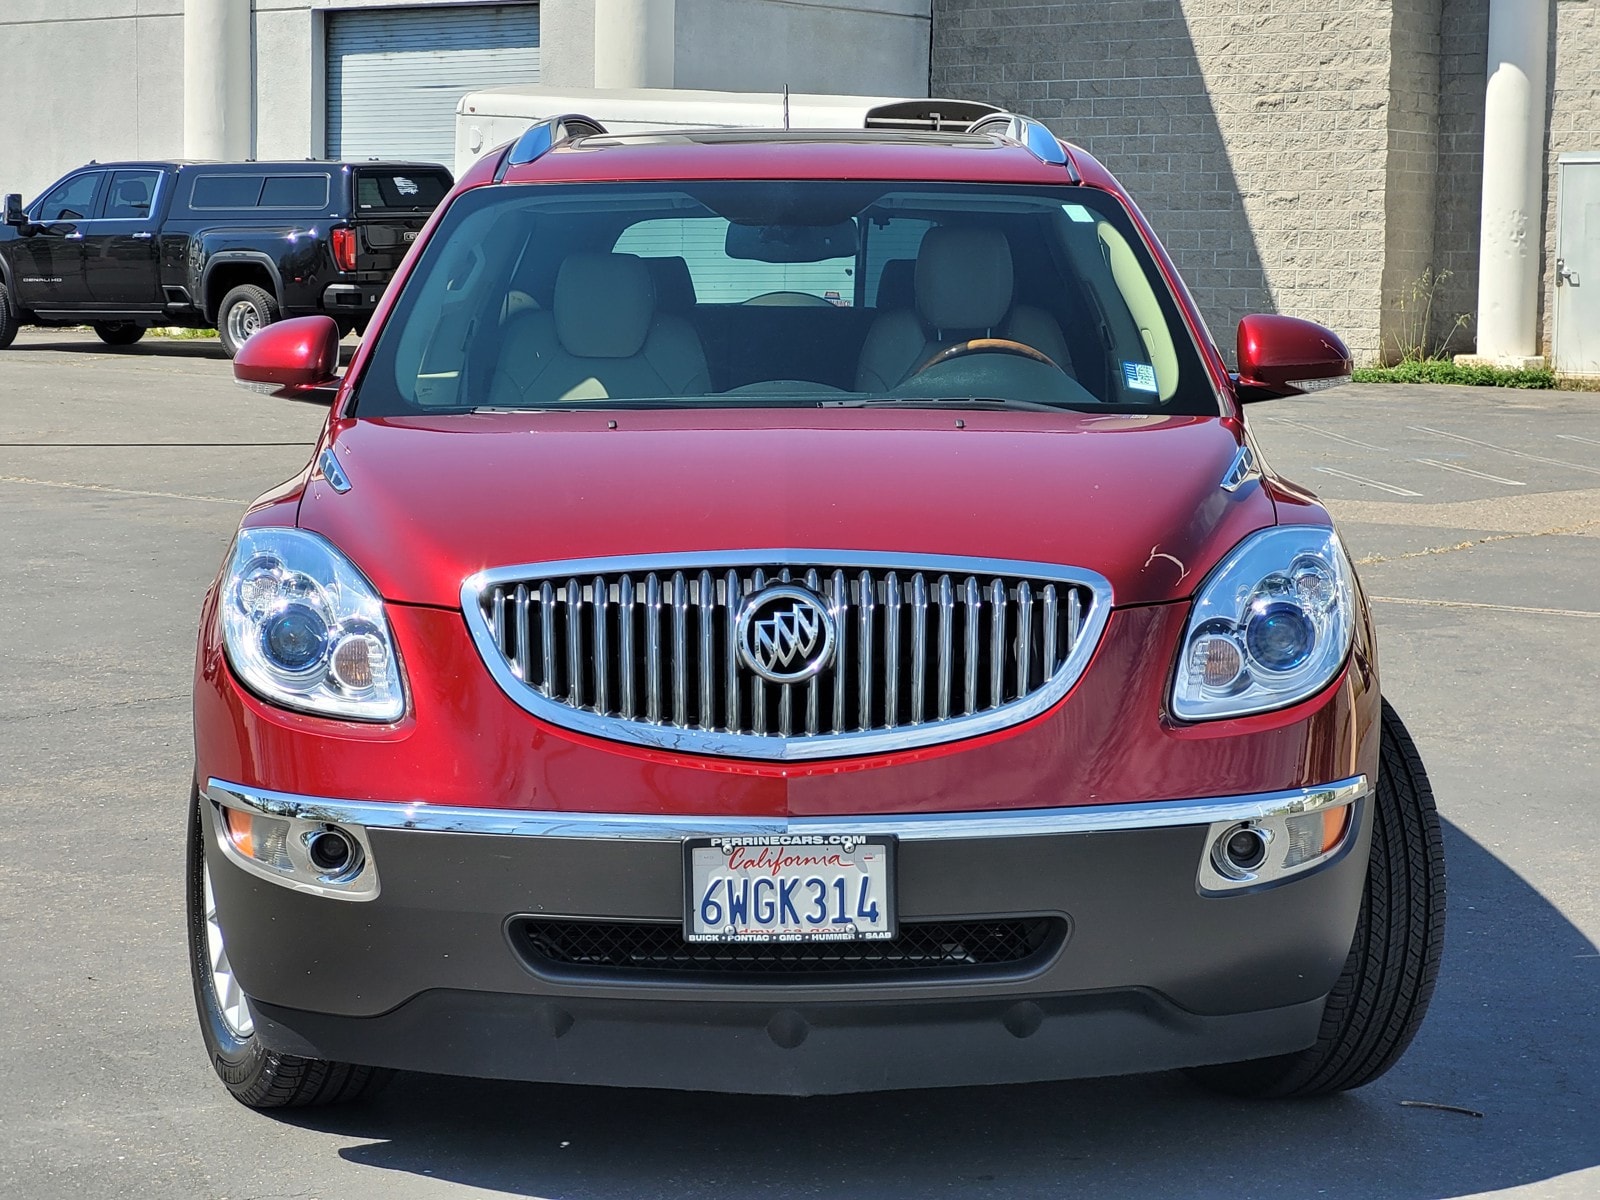 Used 2010 Buick Enclave CXL-1 with VIN 5GALVBED0AJ133876 for sale in Folsom, CA